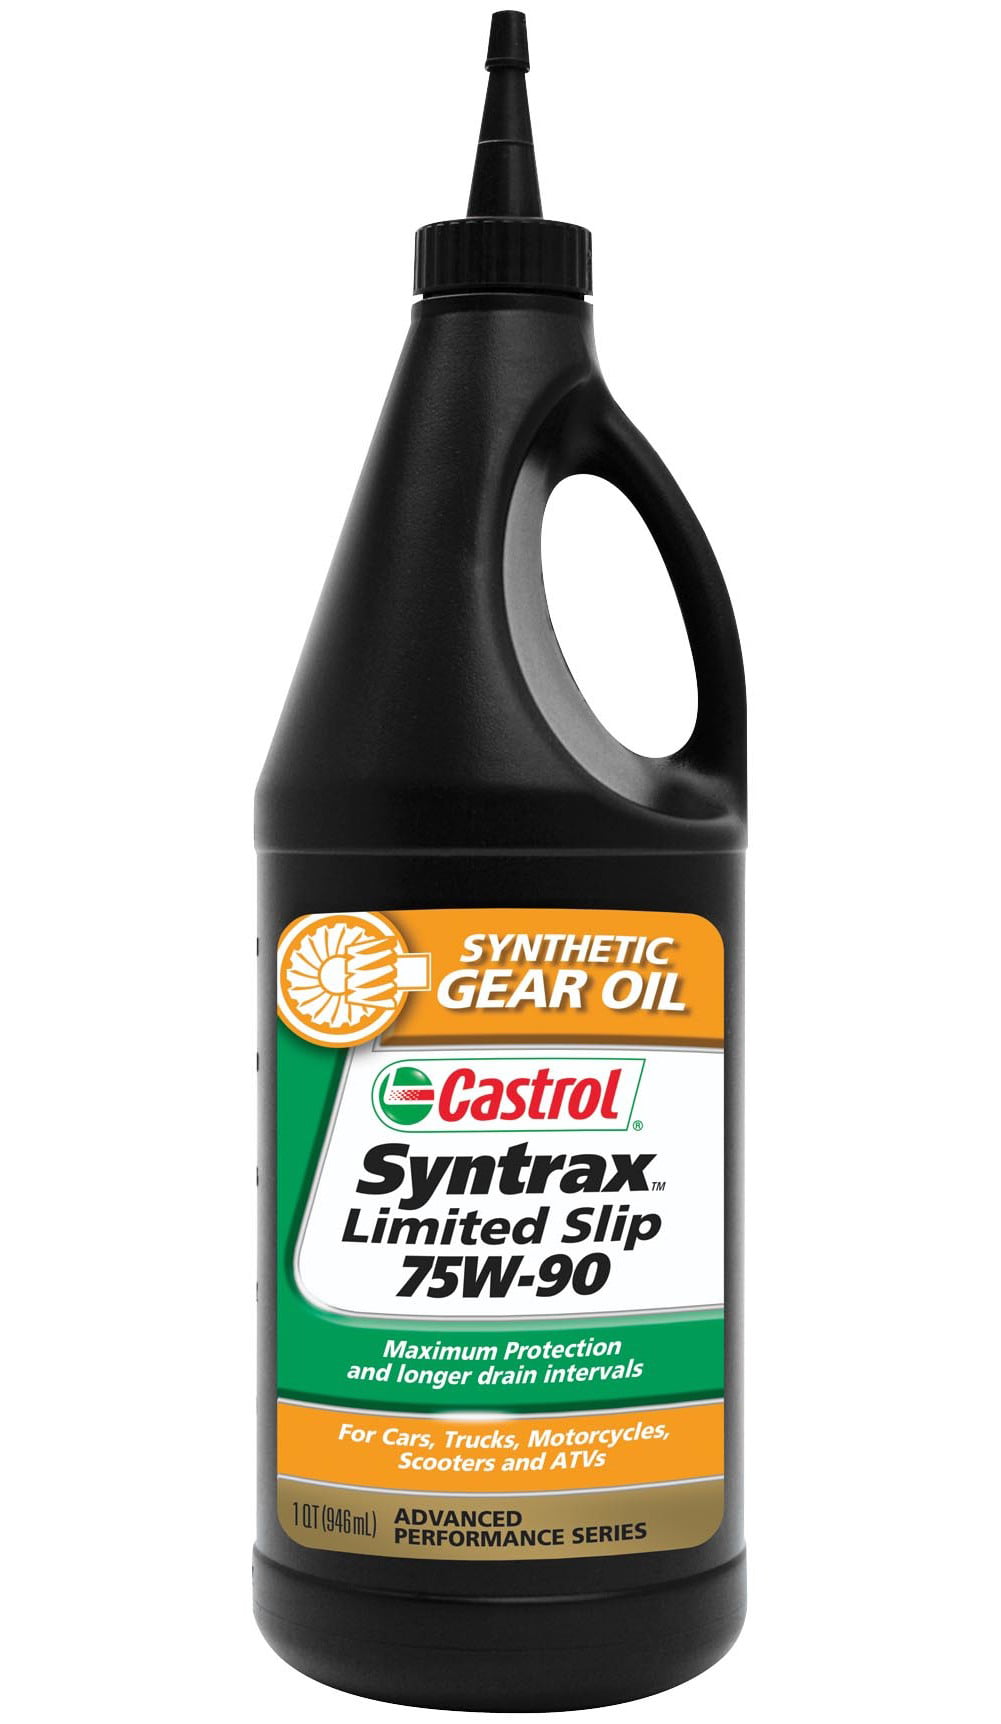 Castrol 06674 Syntrax Limited Slip Gear Oil - 75W-90 - 1L. - Walmart.com - Walmart.com How To Get Gear Oil Out Of Clothes